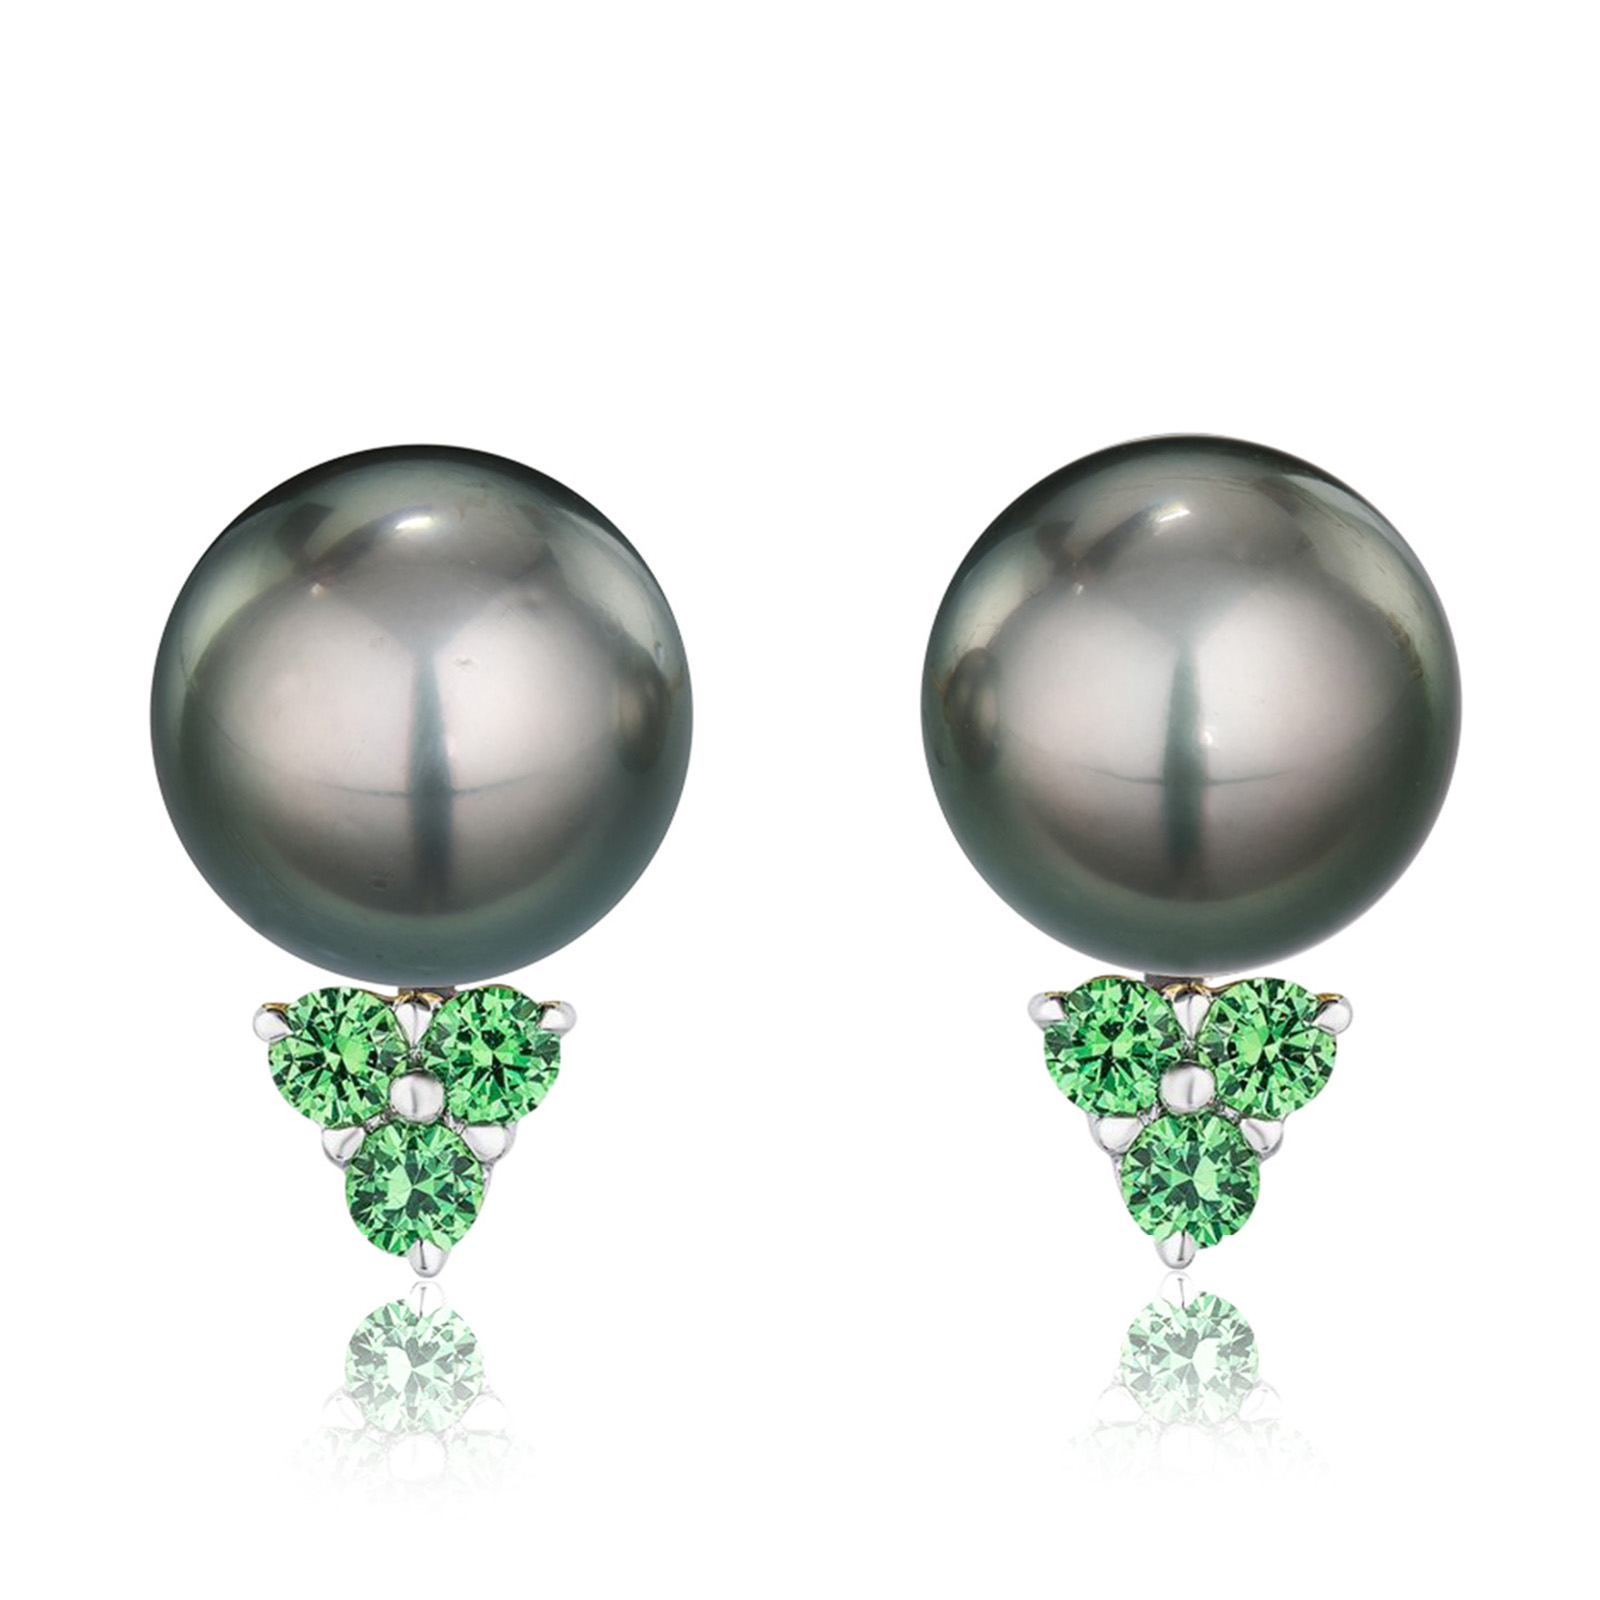 Tsavorite Garnet Jackets for 12-13 mm pearls in 18 karat white gold featuring six round tsavorite garnets weighing a total of approximately 0.66 carats.